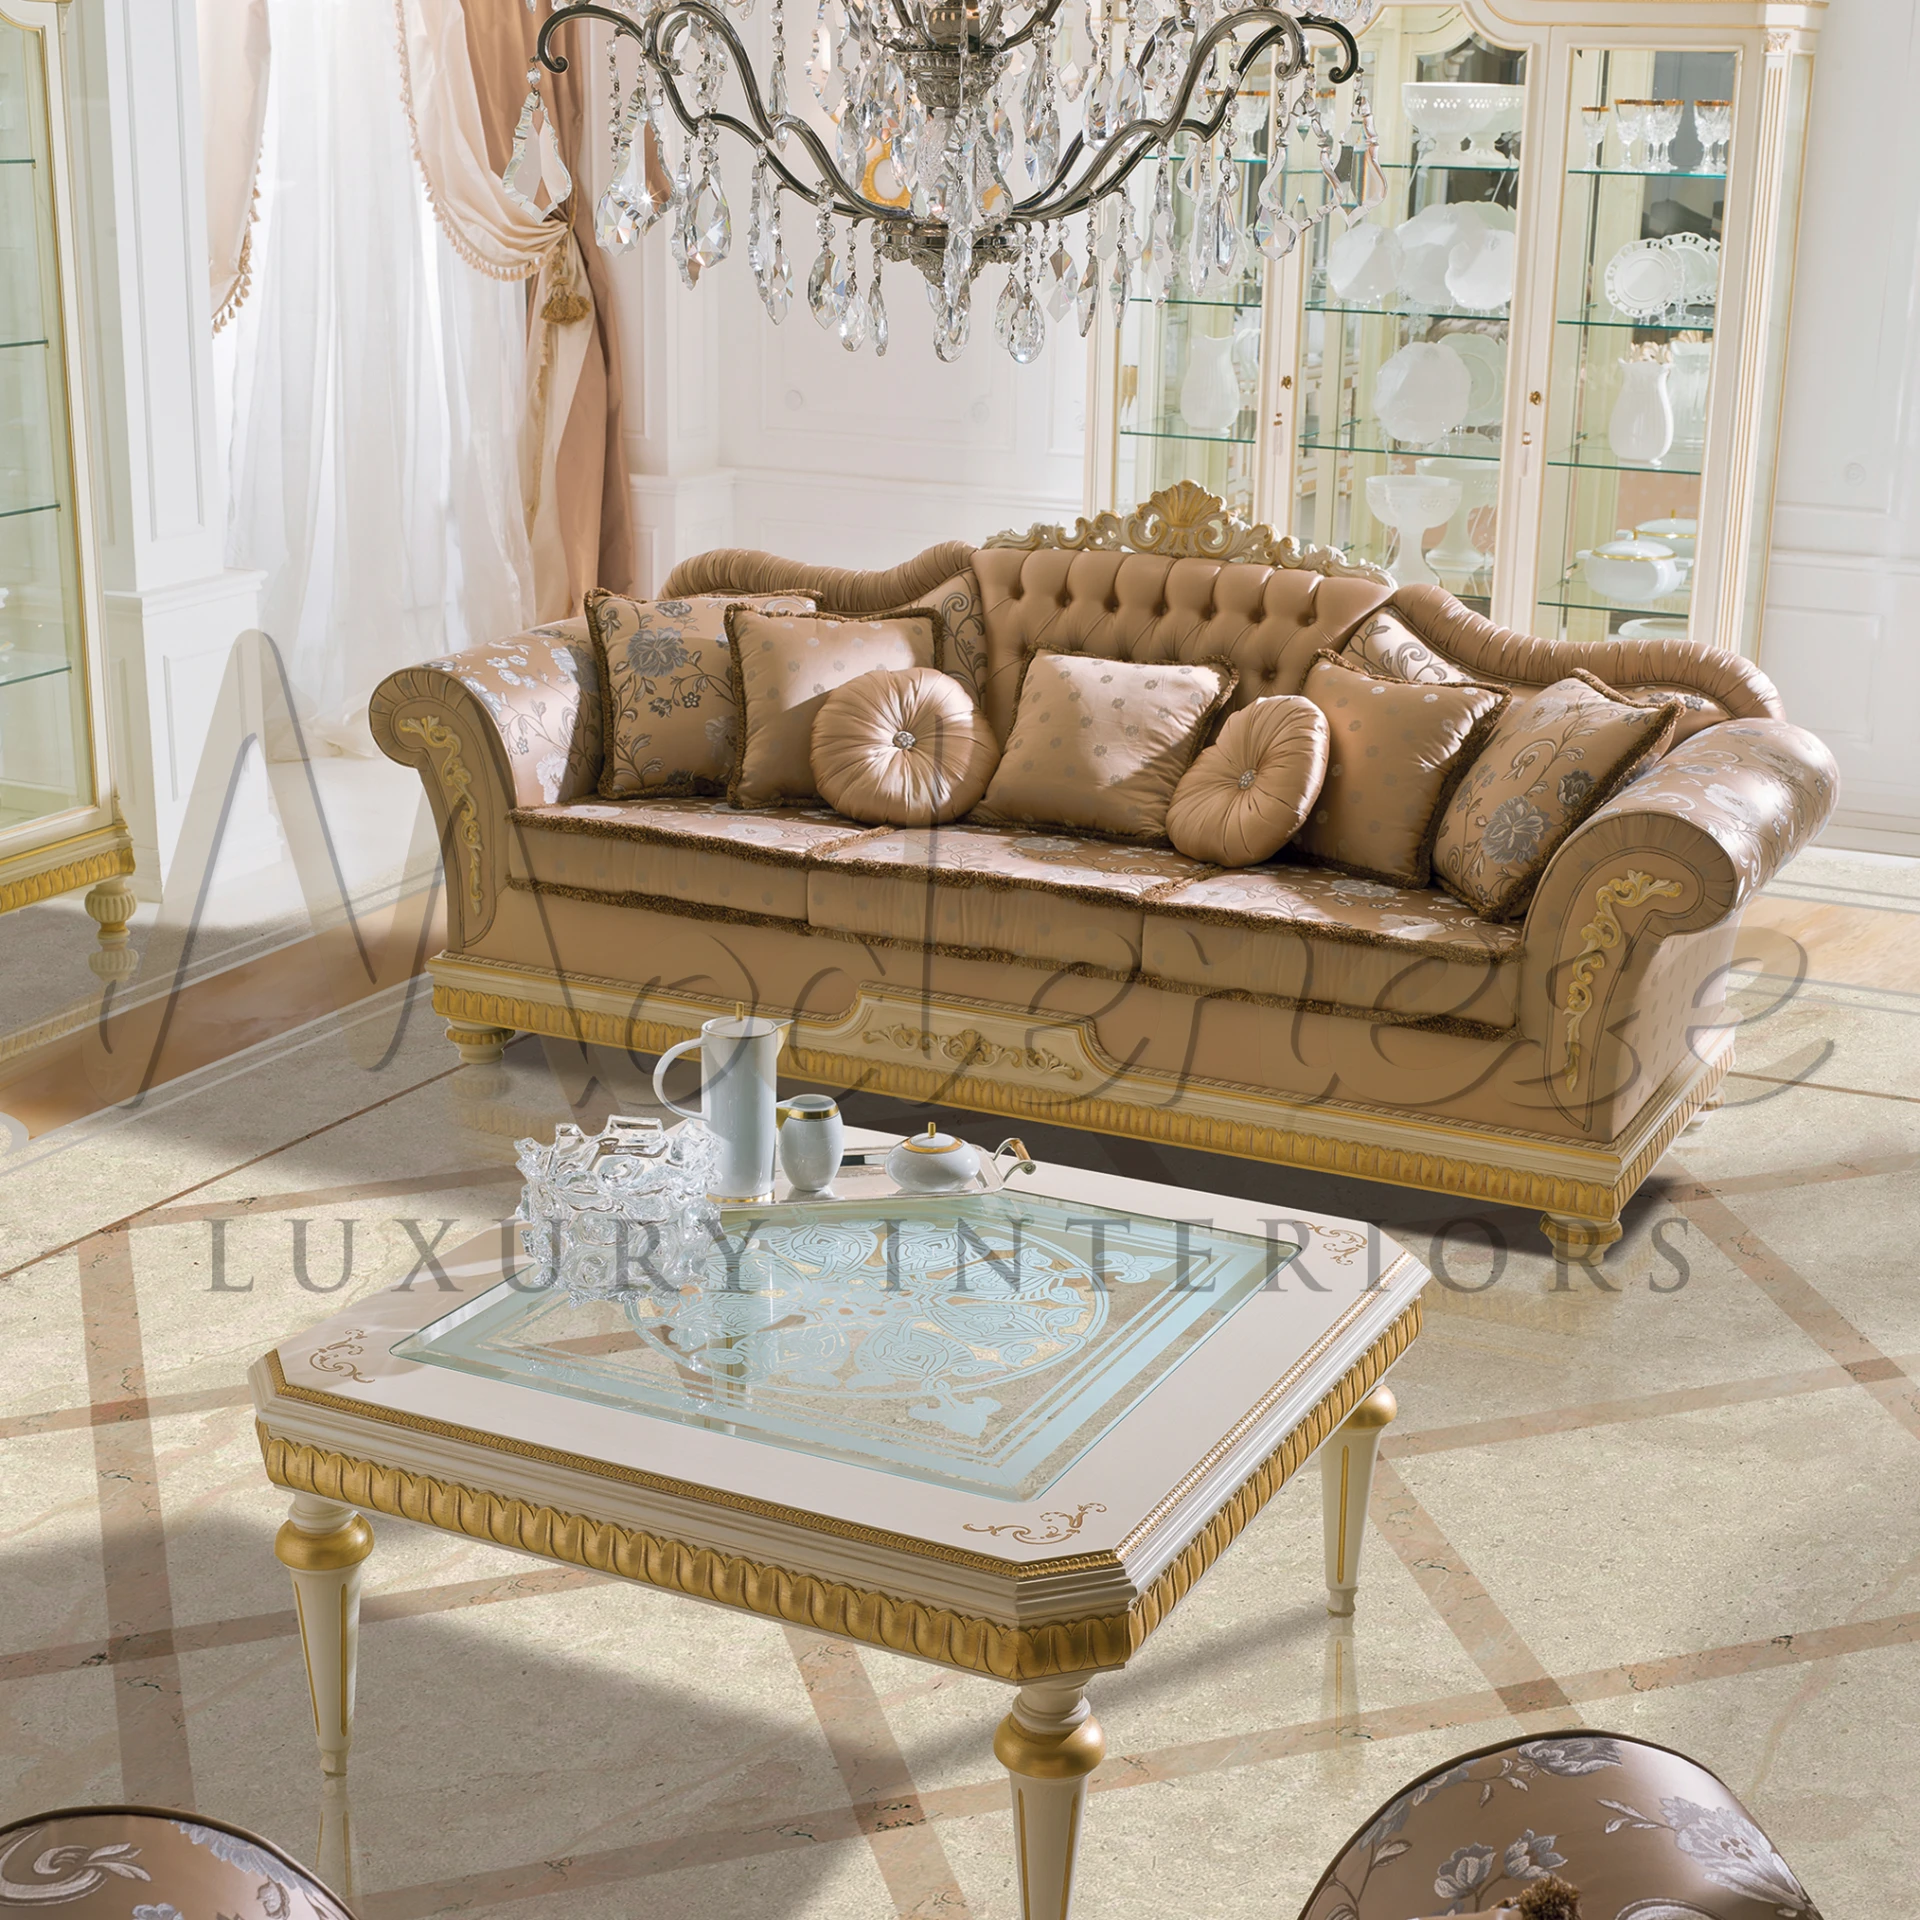 Luxurious Beige Floral Sofa with velvet upholstery, solid wood frame, and intricate carvings, epitome of Italian design elegance.